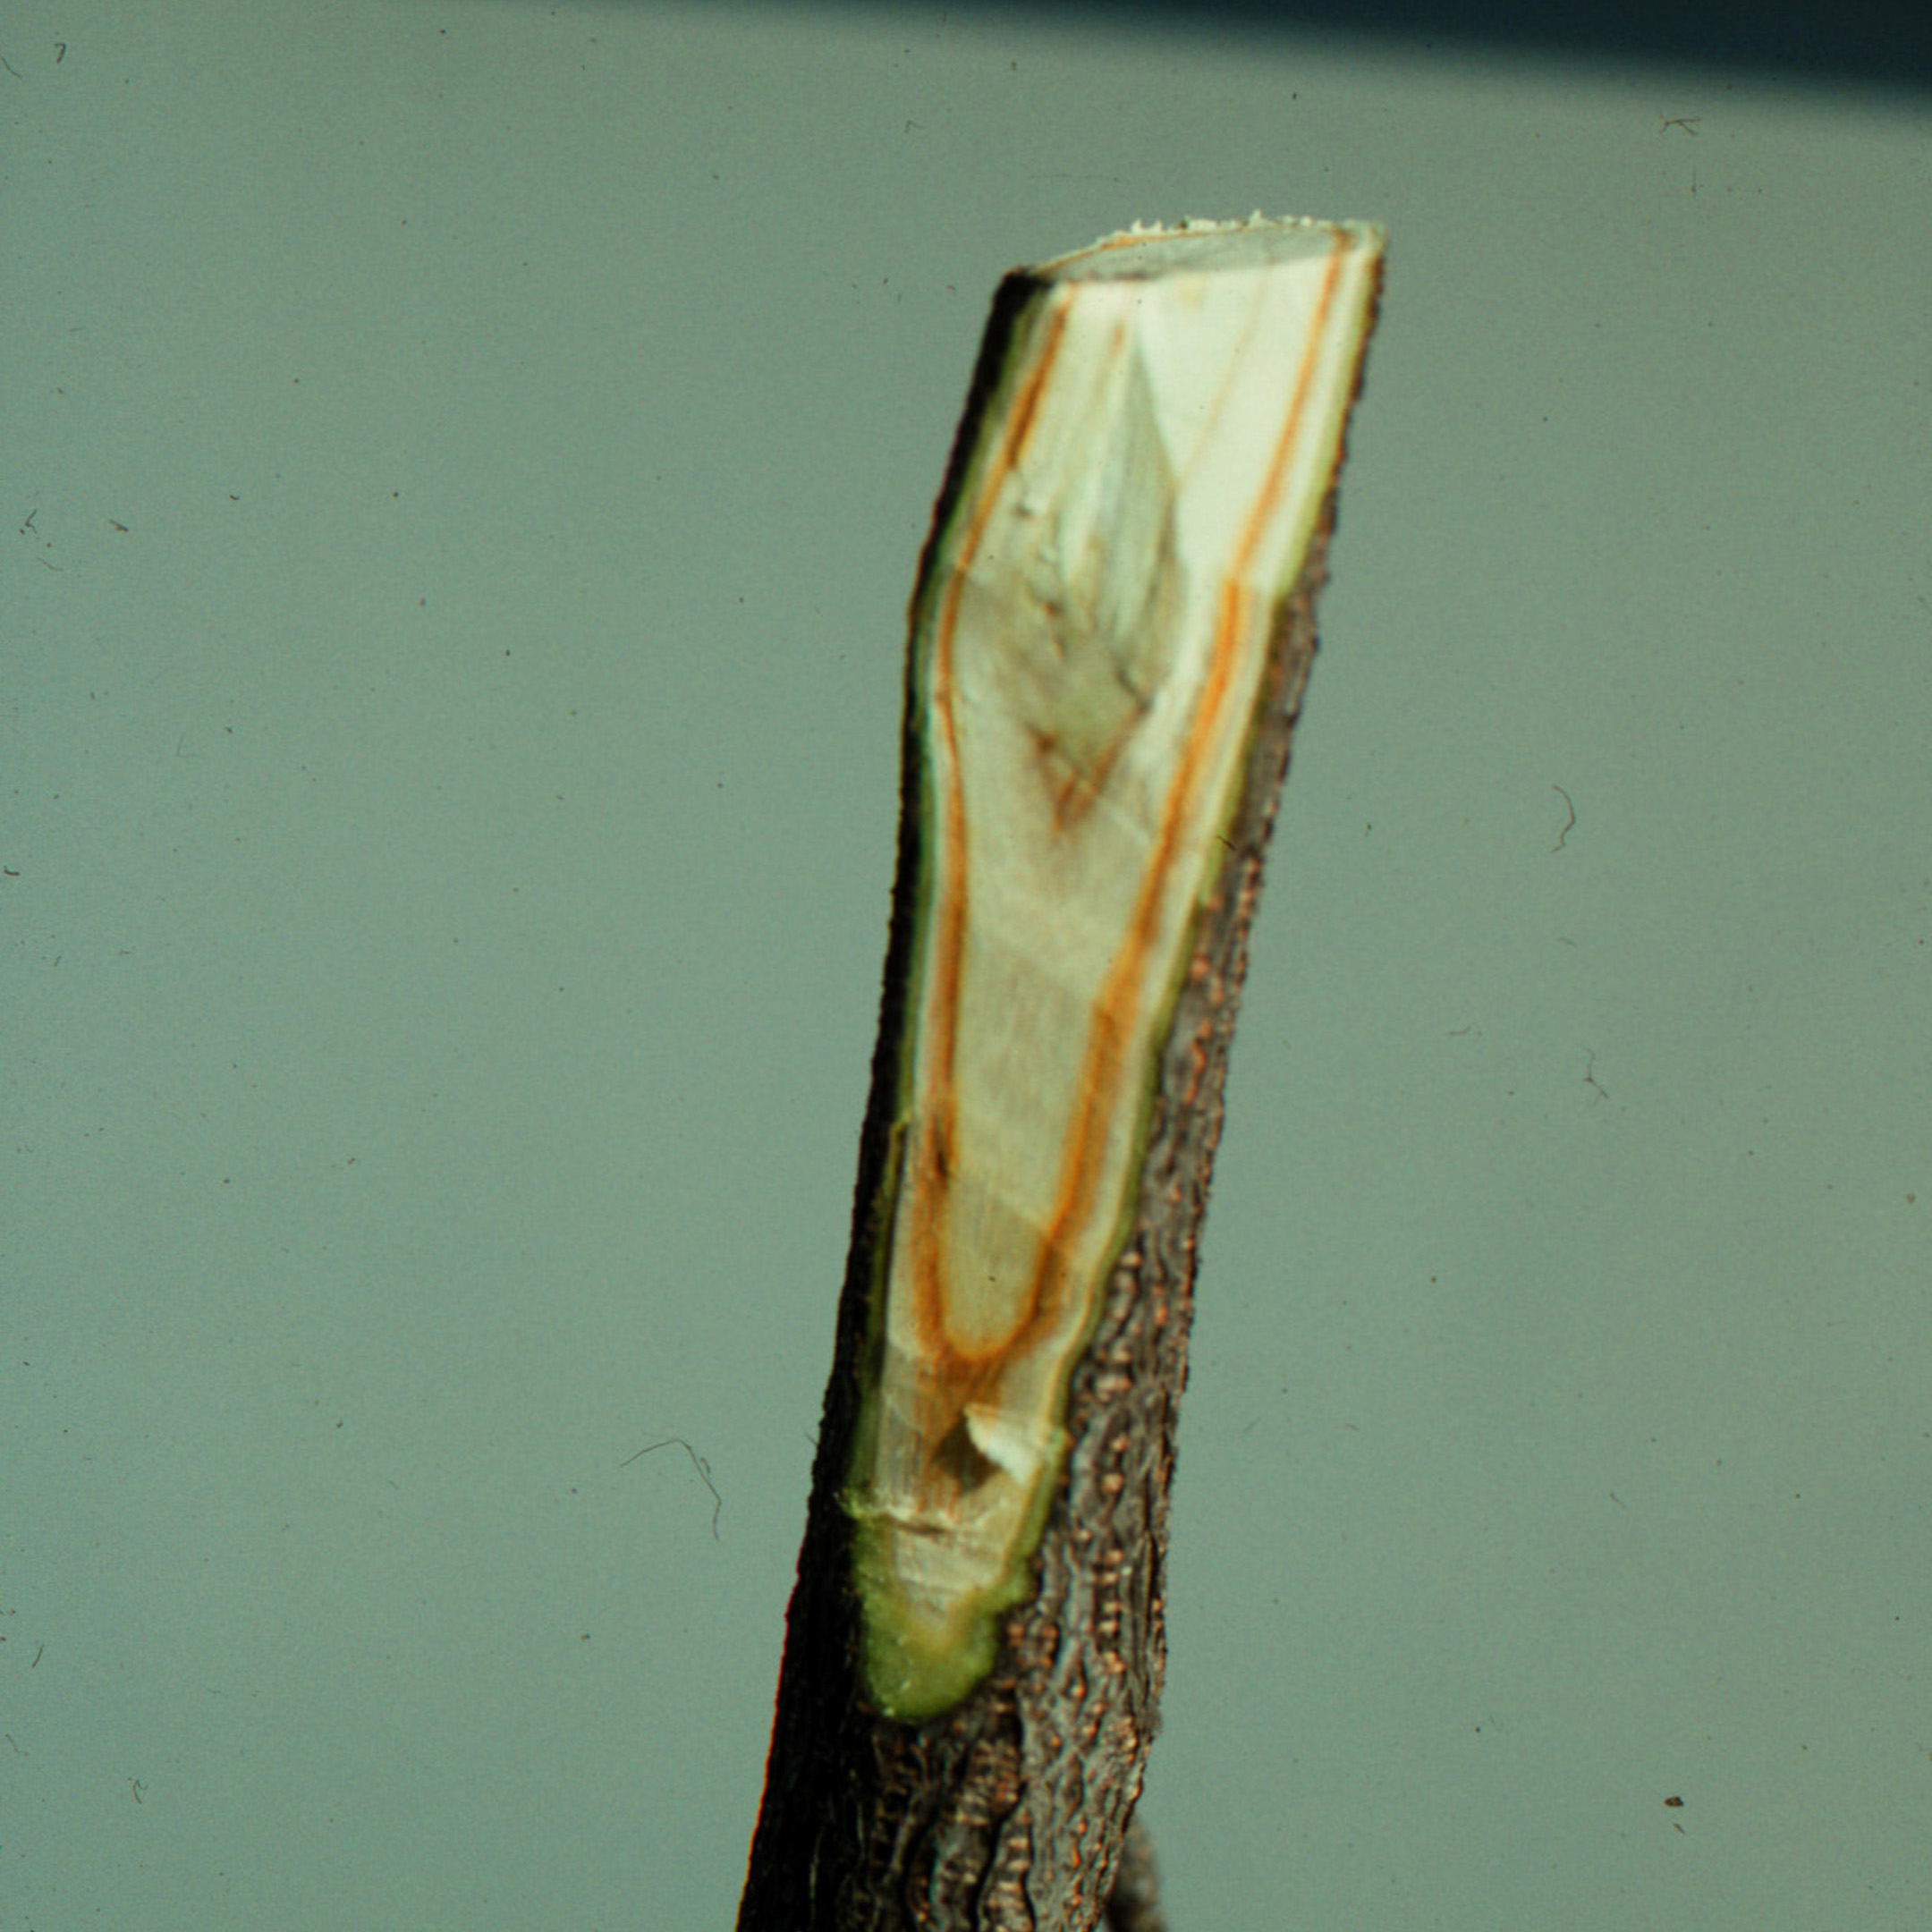 Internal streaking in the sapwood of a branch is typical of Verticillium wilt.